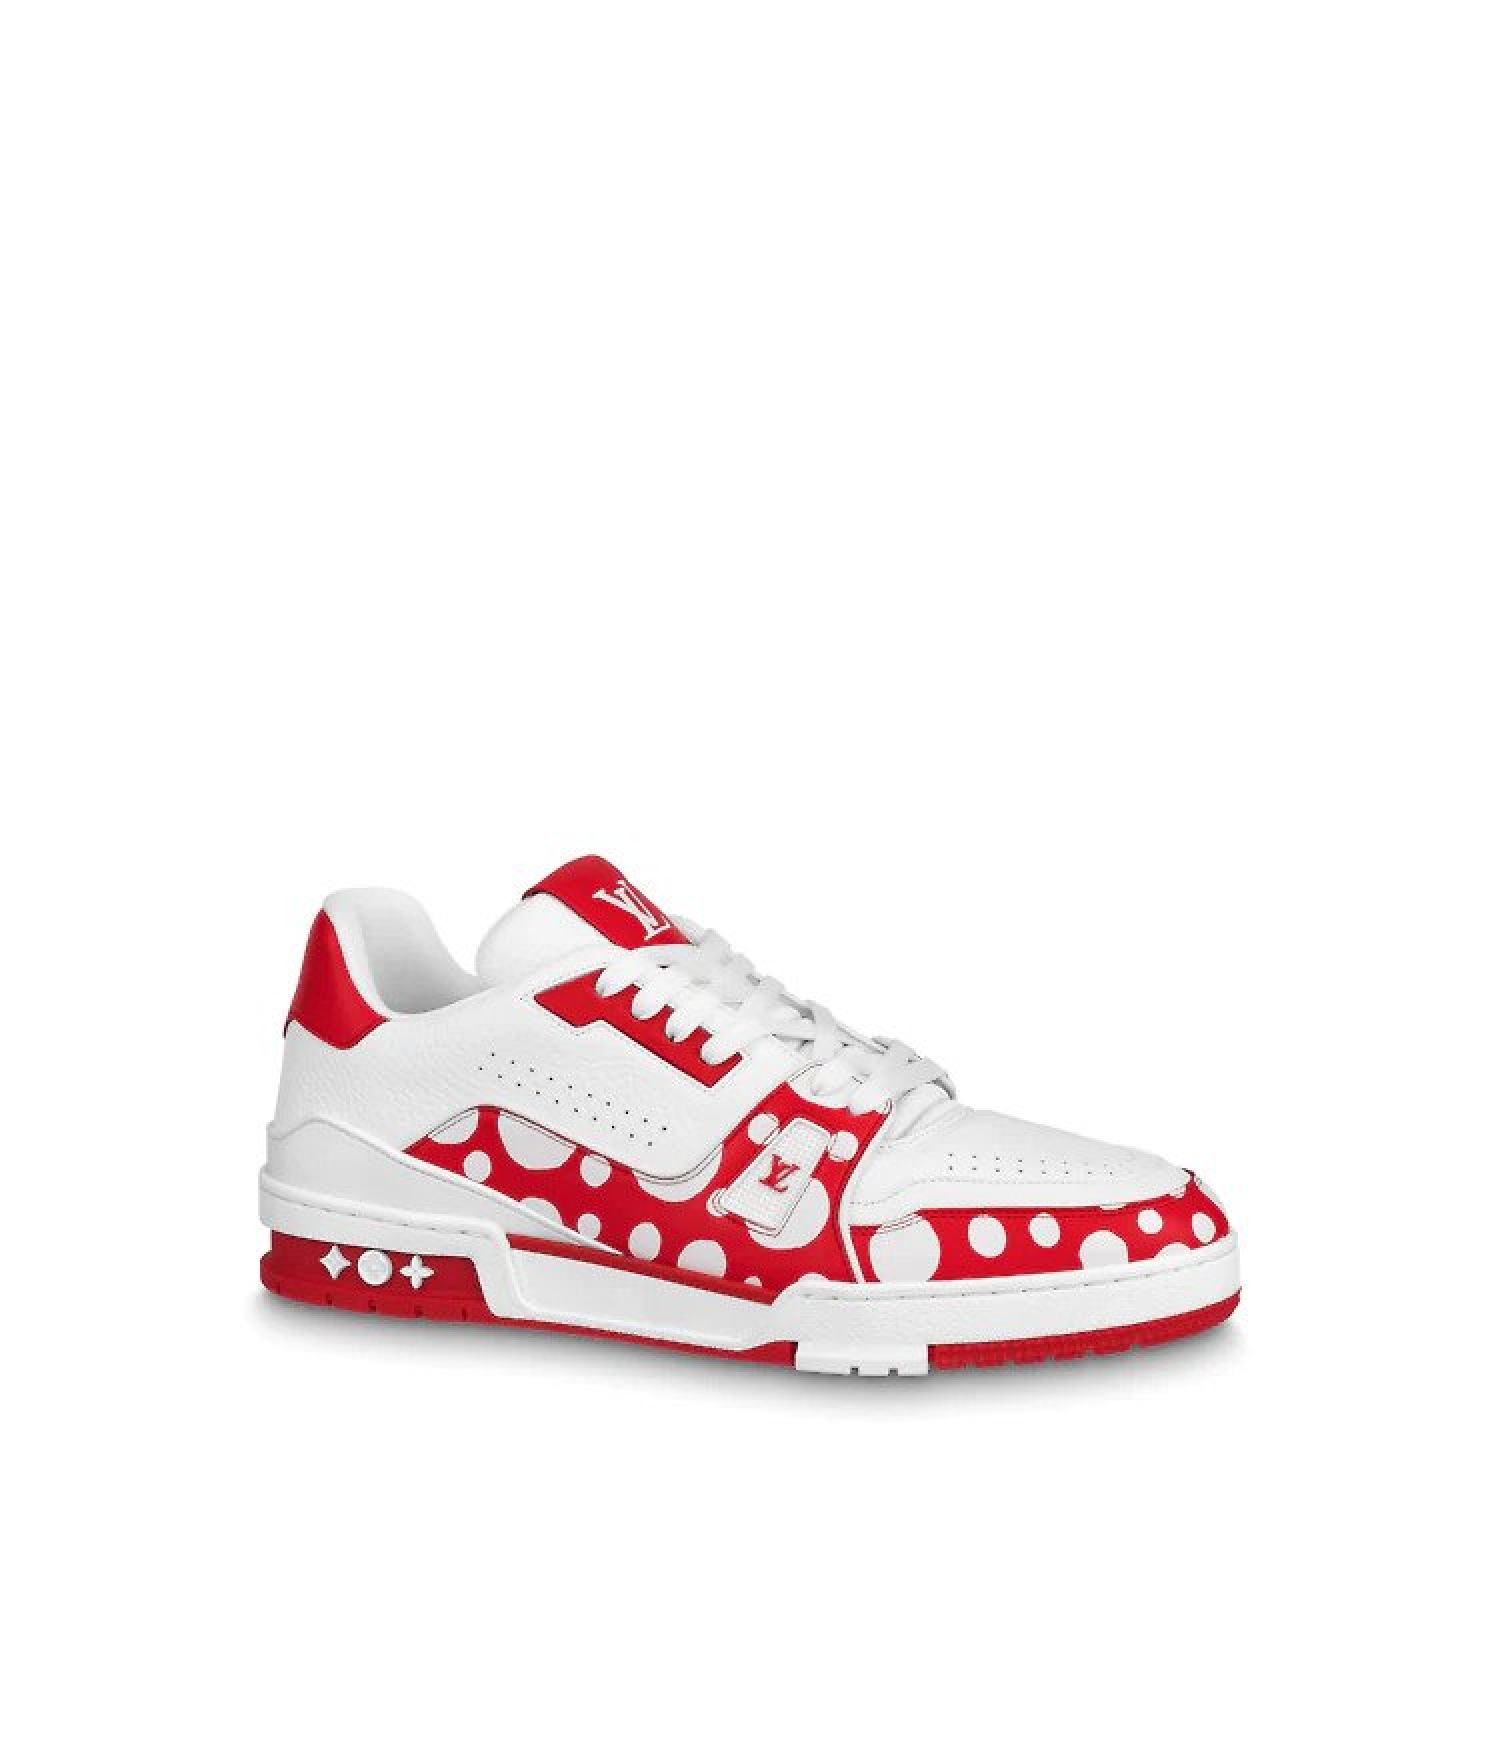 Luxury Louis Vuitton Skate Trainer White/Red Sneakers in Lagos